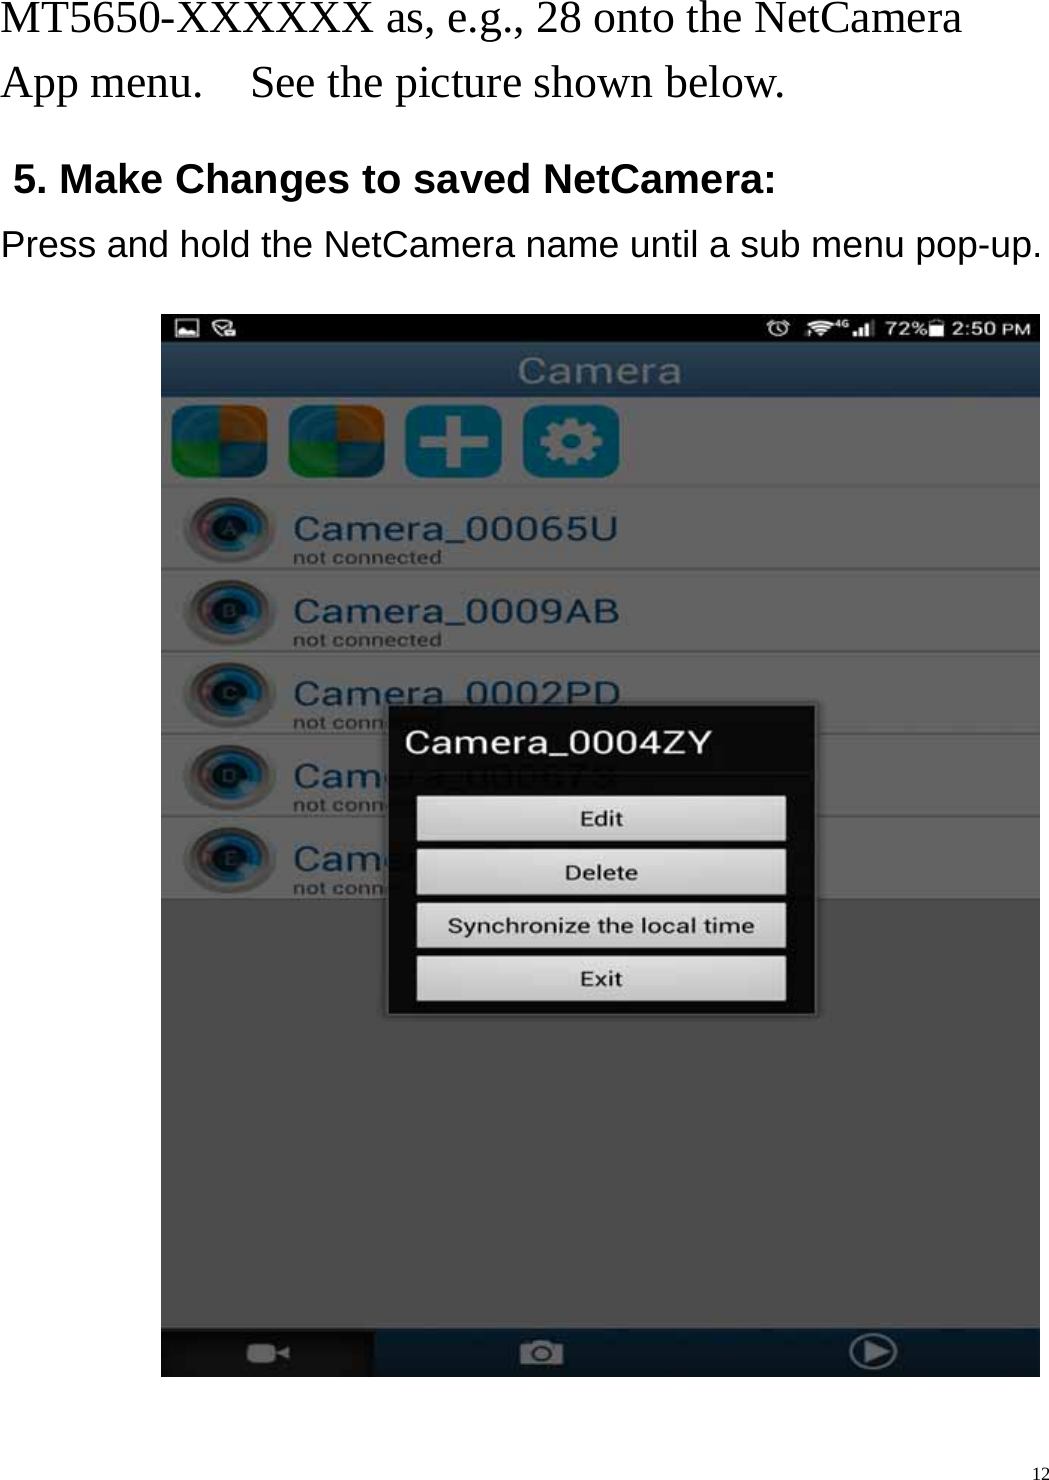    12MT5650-XXXXXX as, e.g., 28 onto the NetCamera App menu.    See the picture shown below.    5. Make Changes to saved NetCamera: Press and hold the NetCamera name until a sub menu pop-up.           